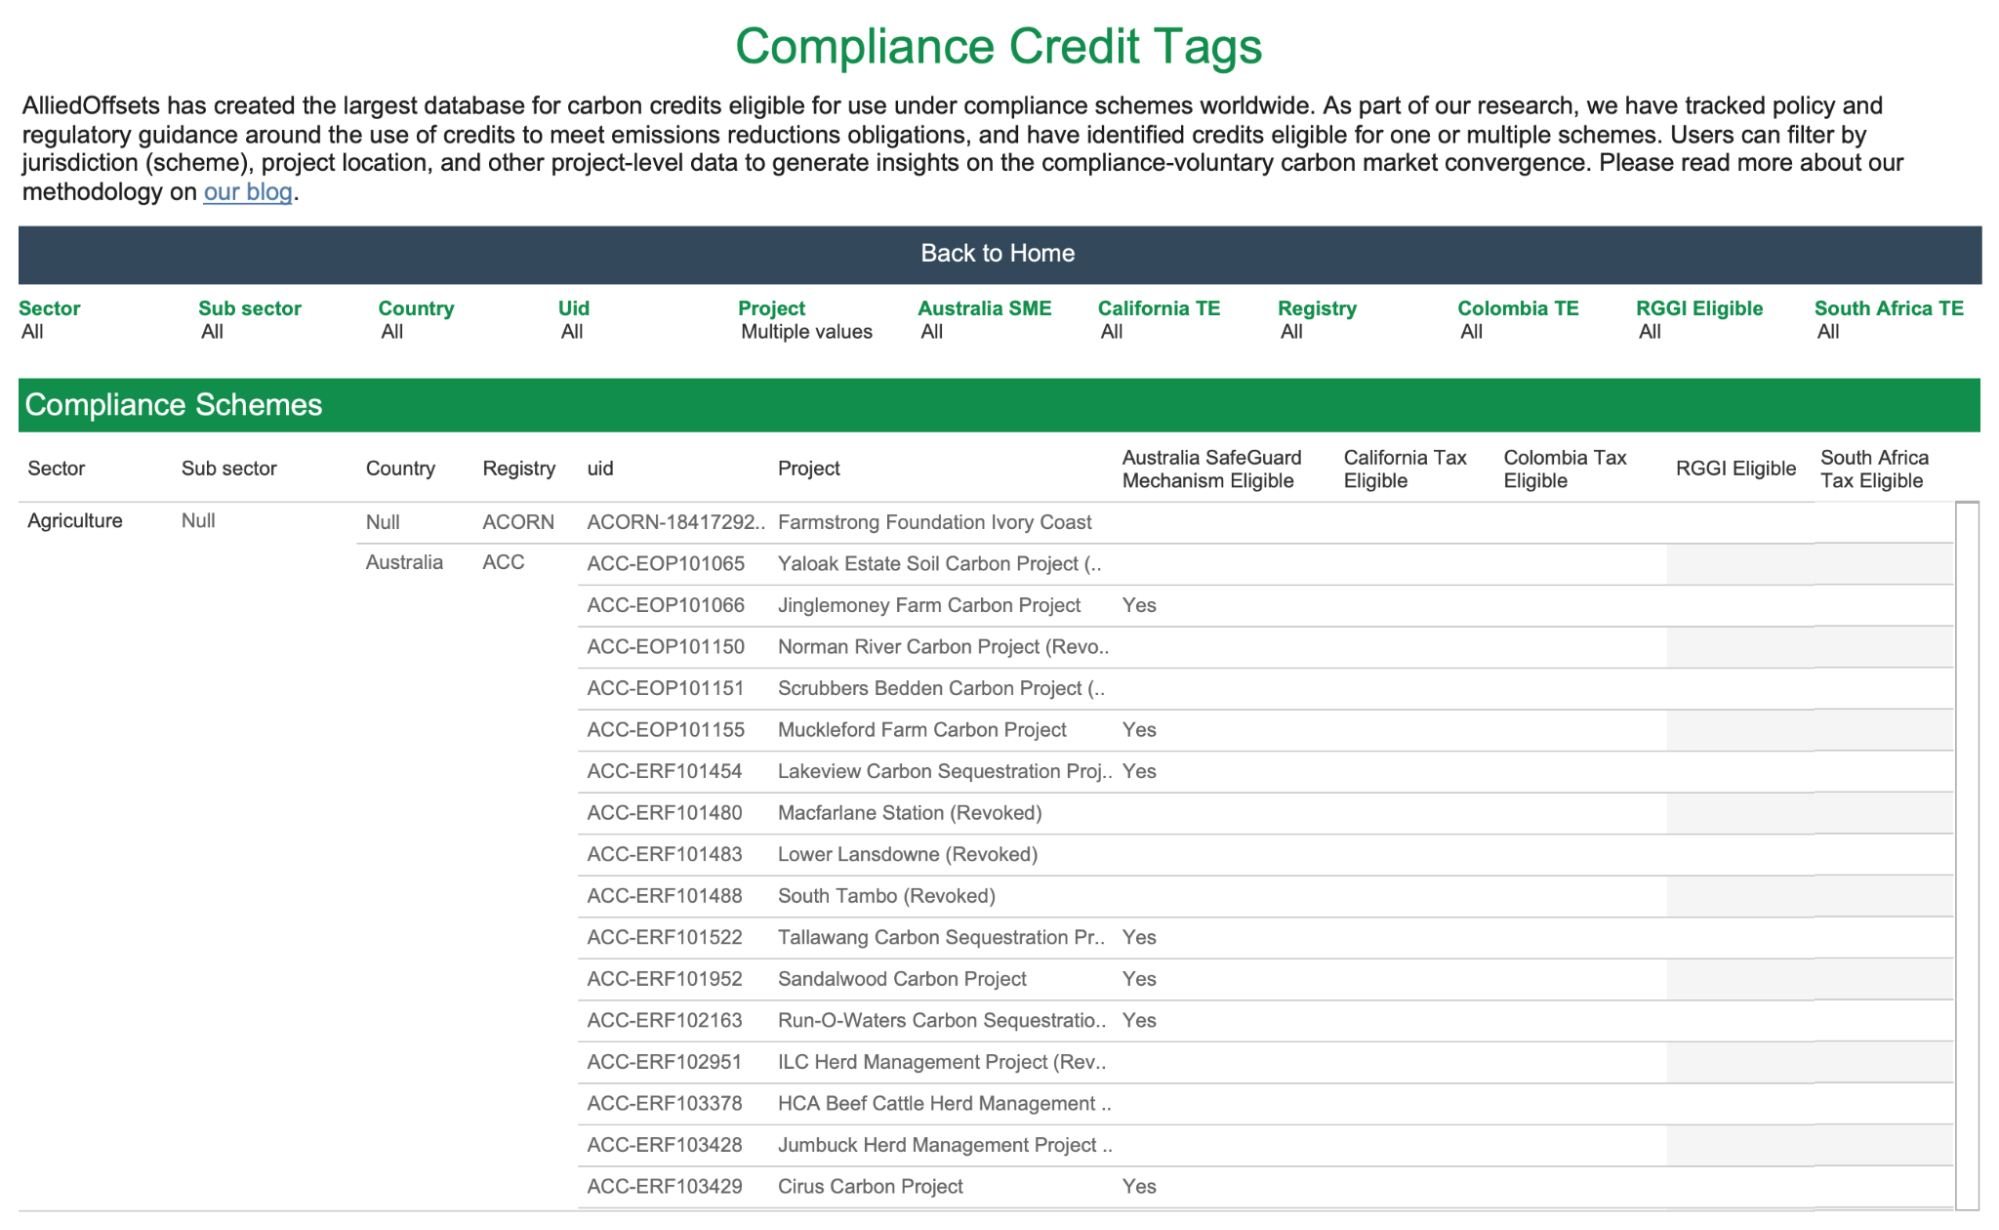 VCM-Compliance Credit Tracker: Frequently Asked Questions